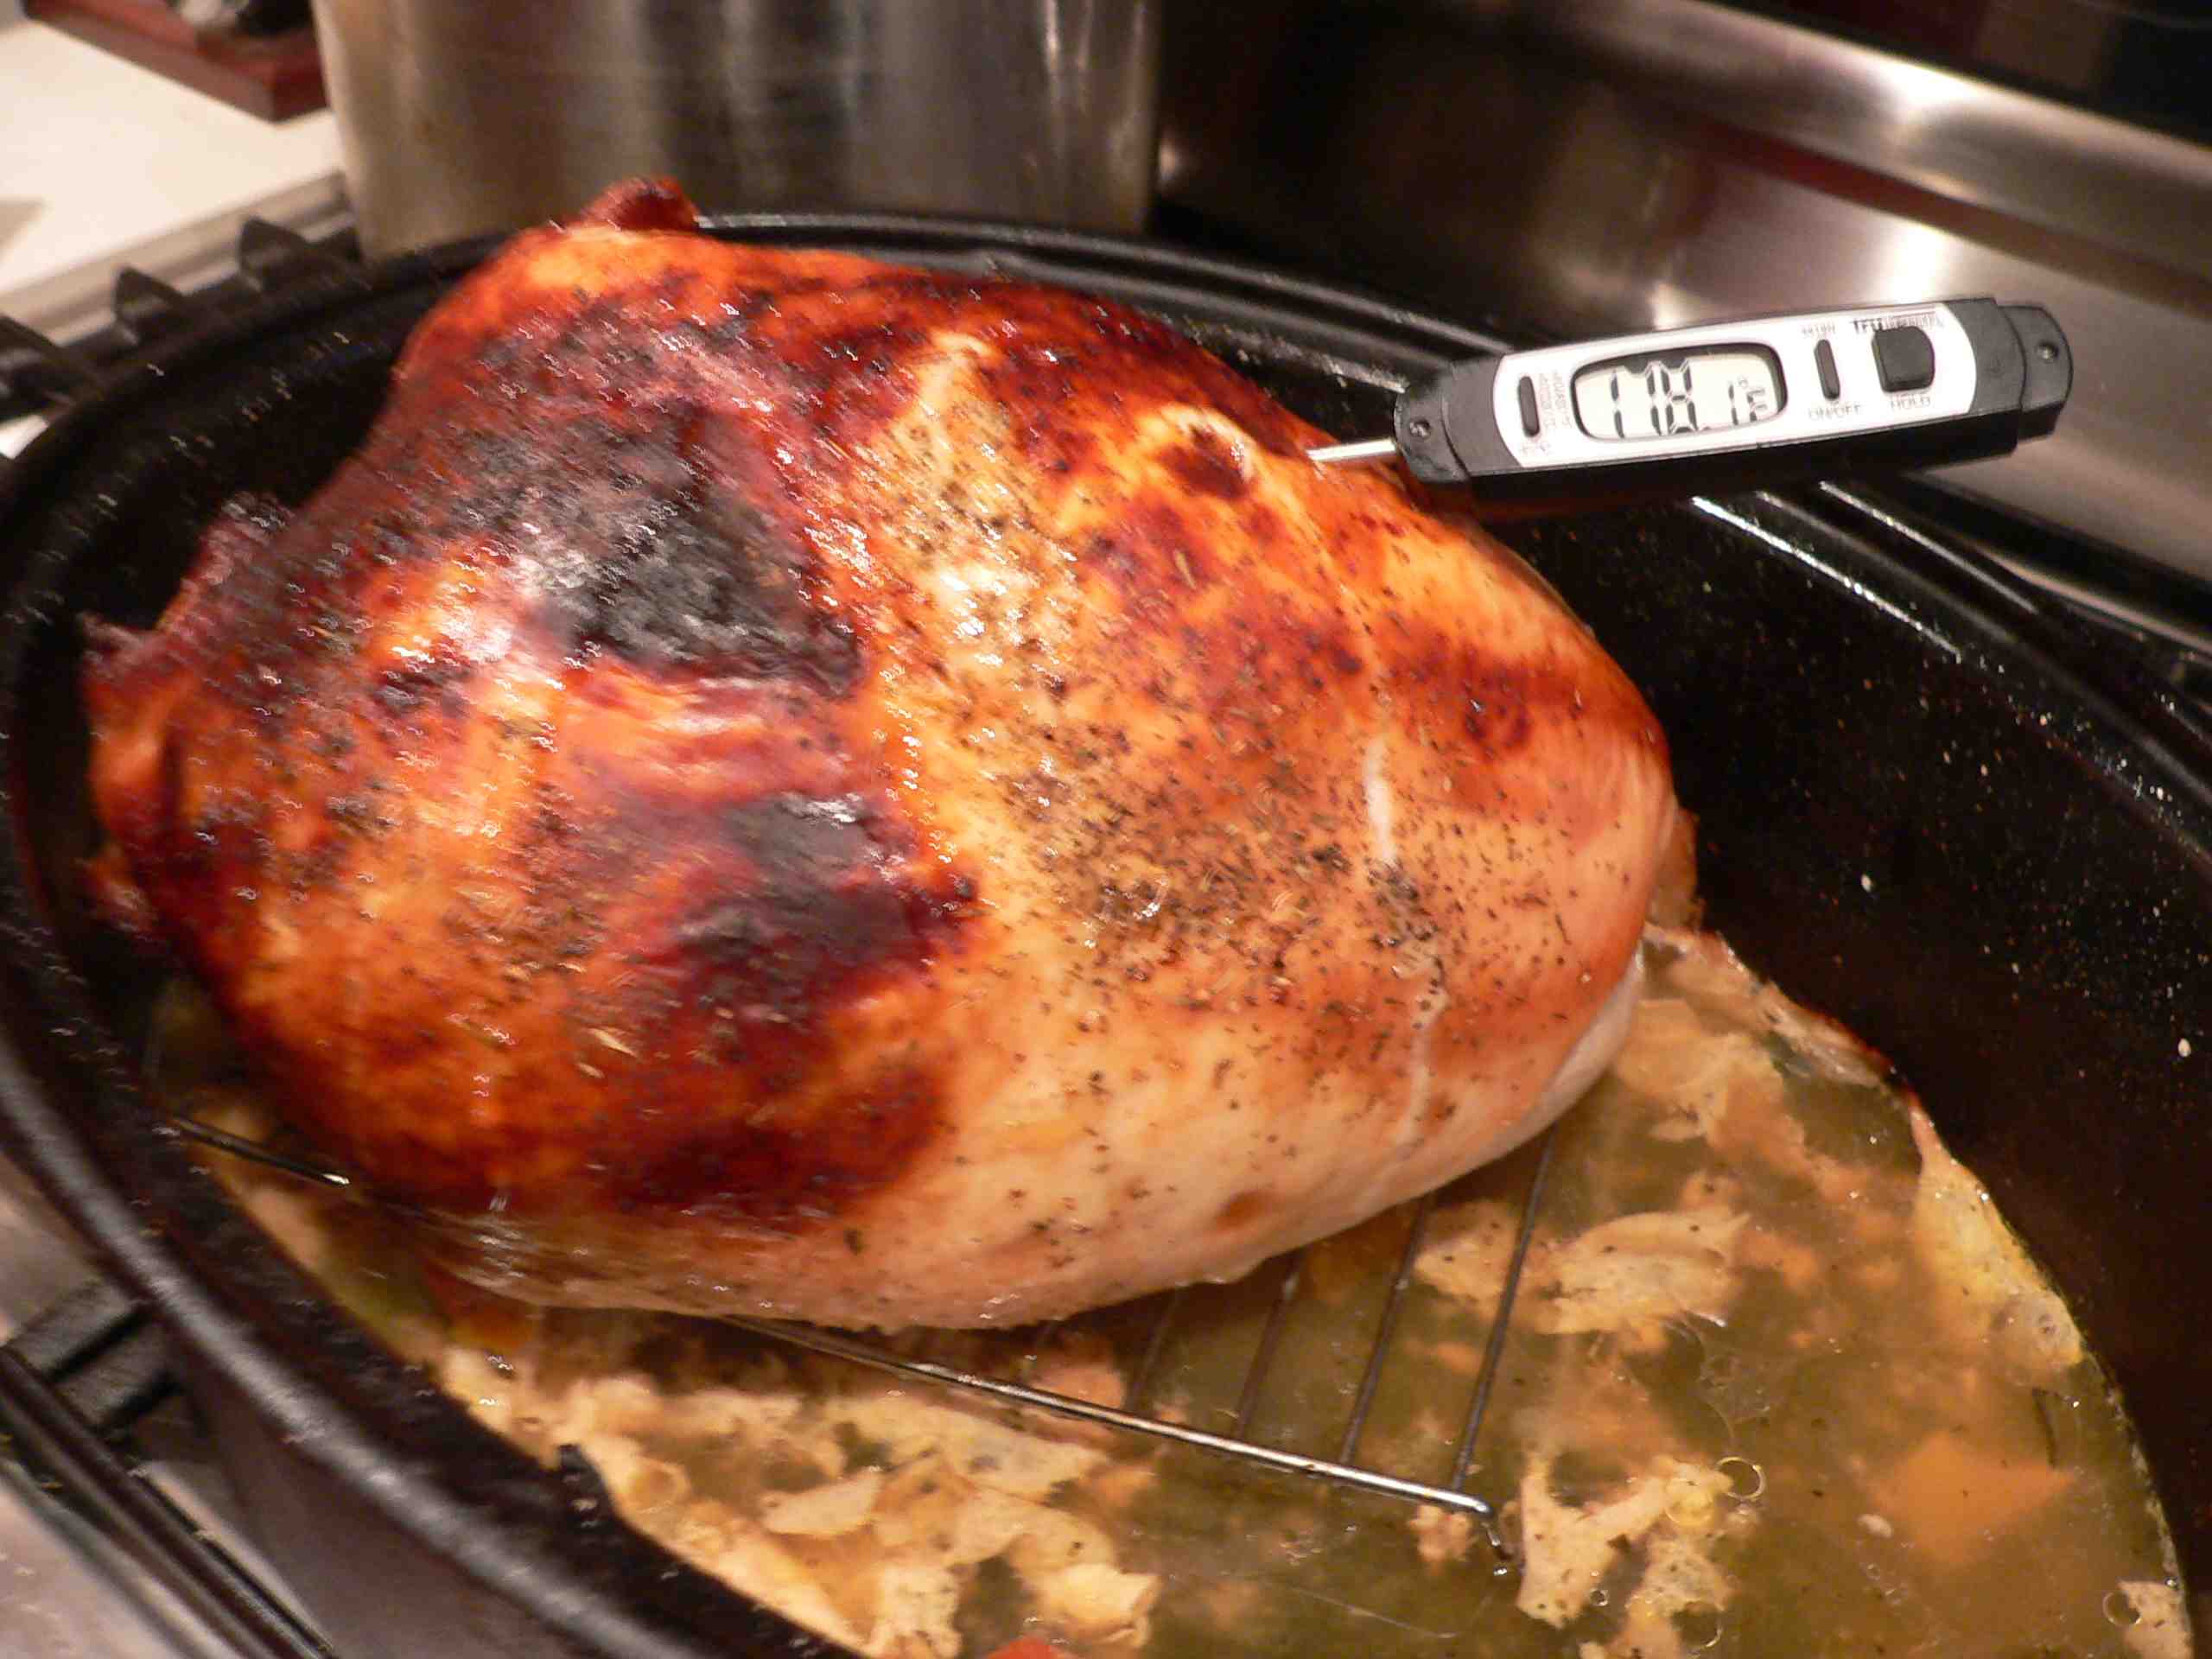 Pop-up turkey thermometers can suck